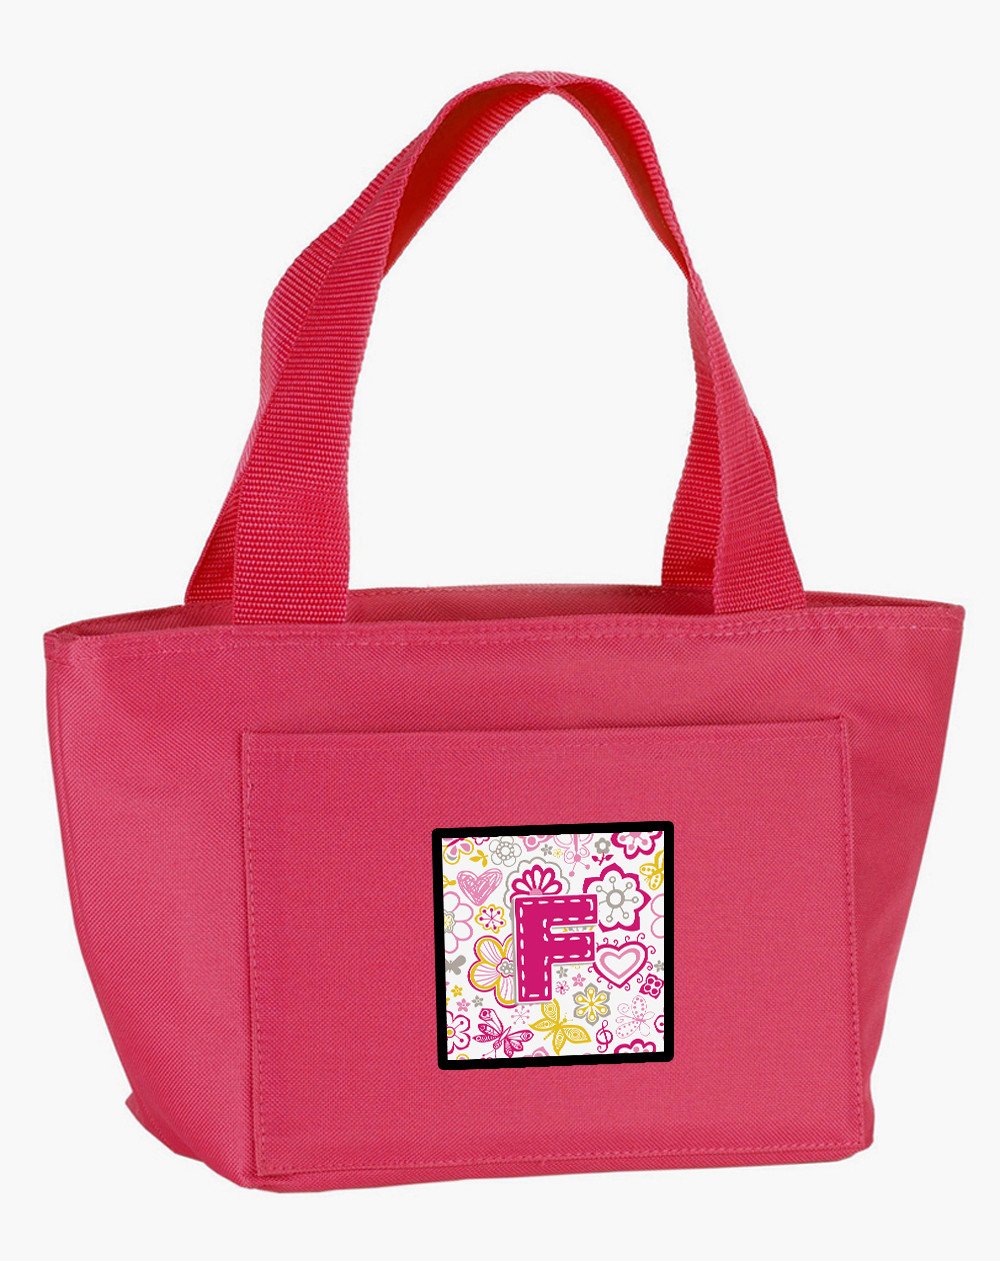 Letter F Flowers and Butterflies Pink Lunch Bag CJ2005-FPK-8808 by Caroline's Treasures